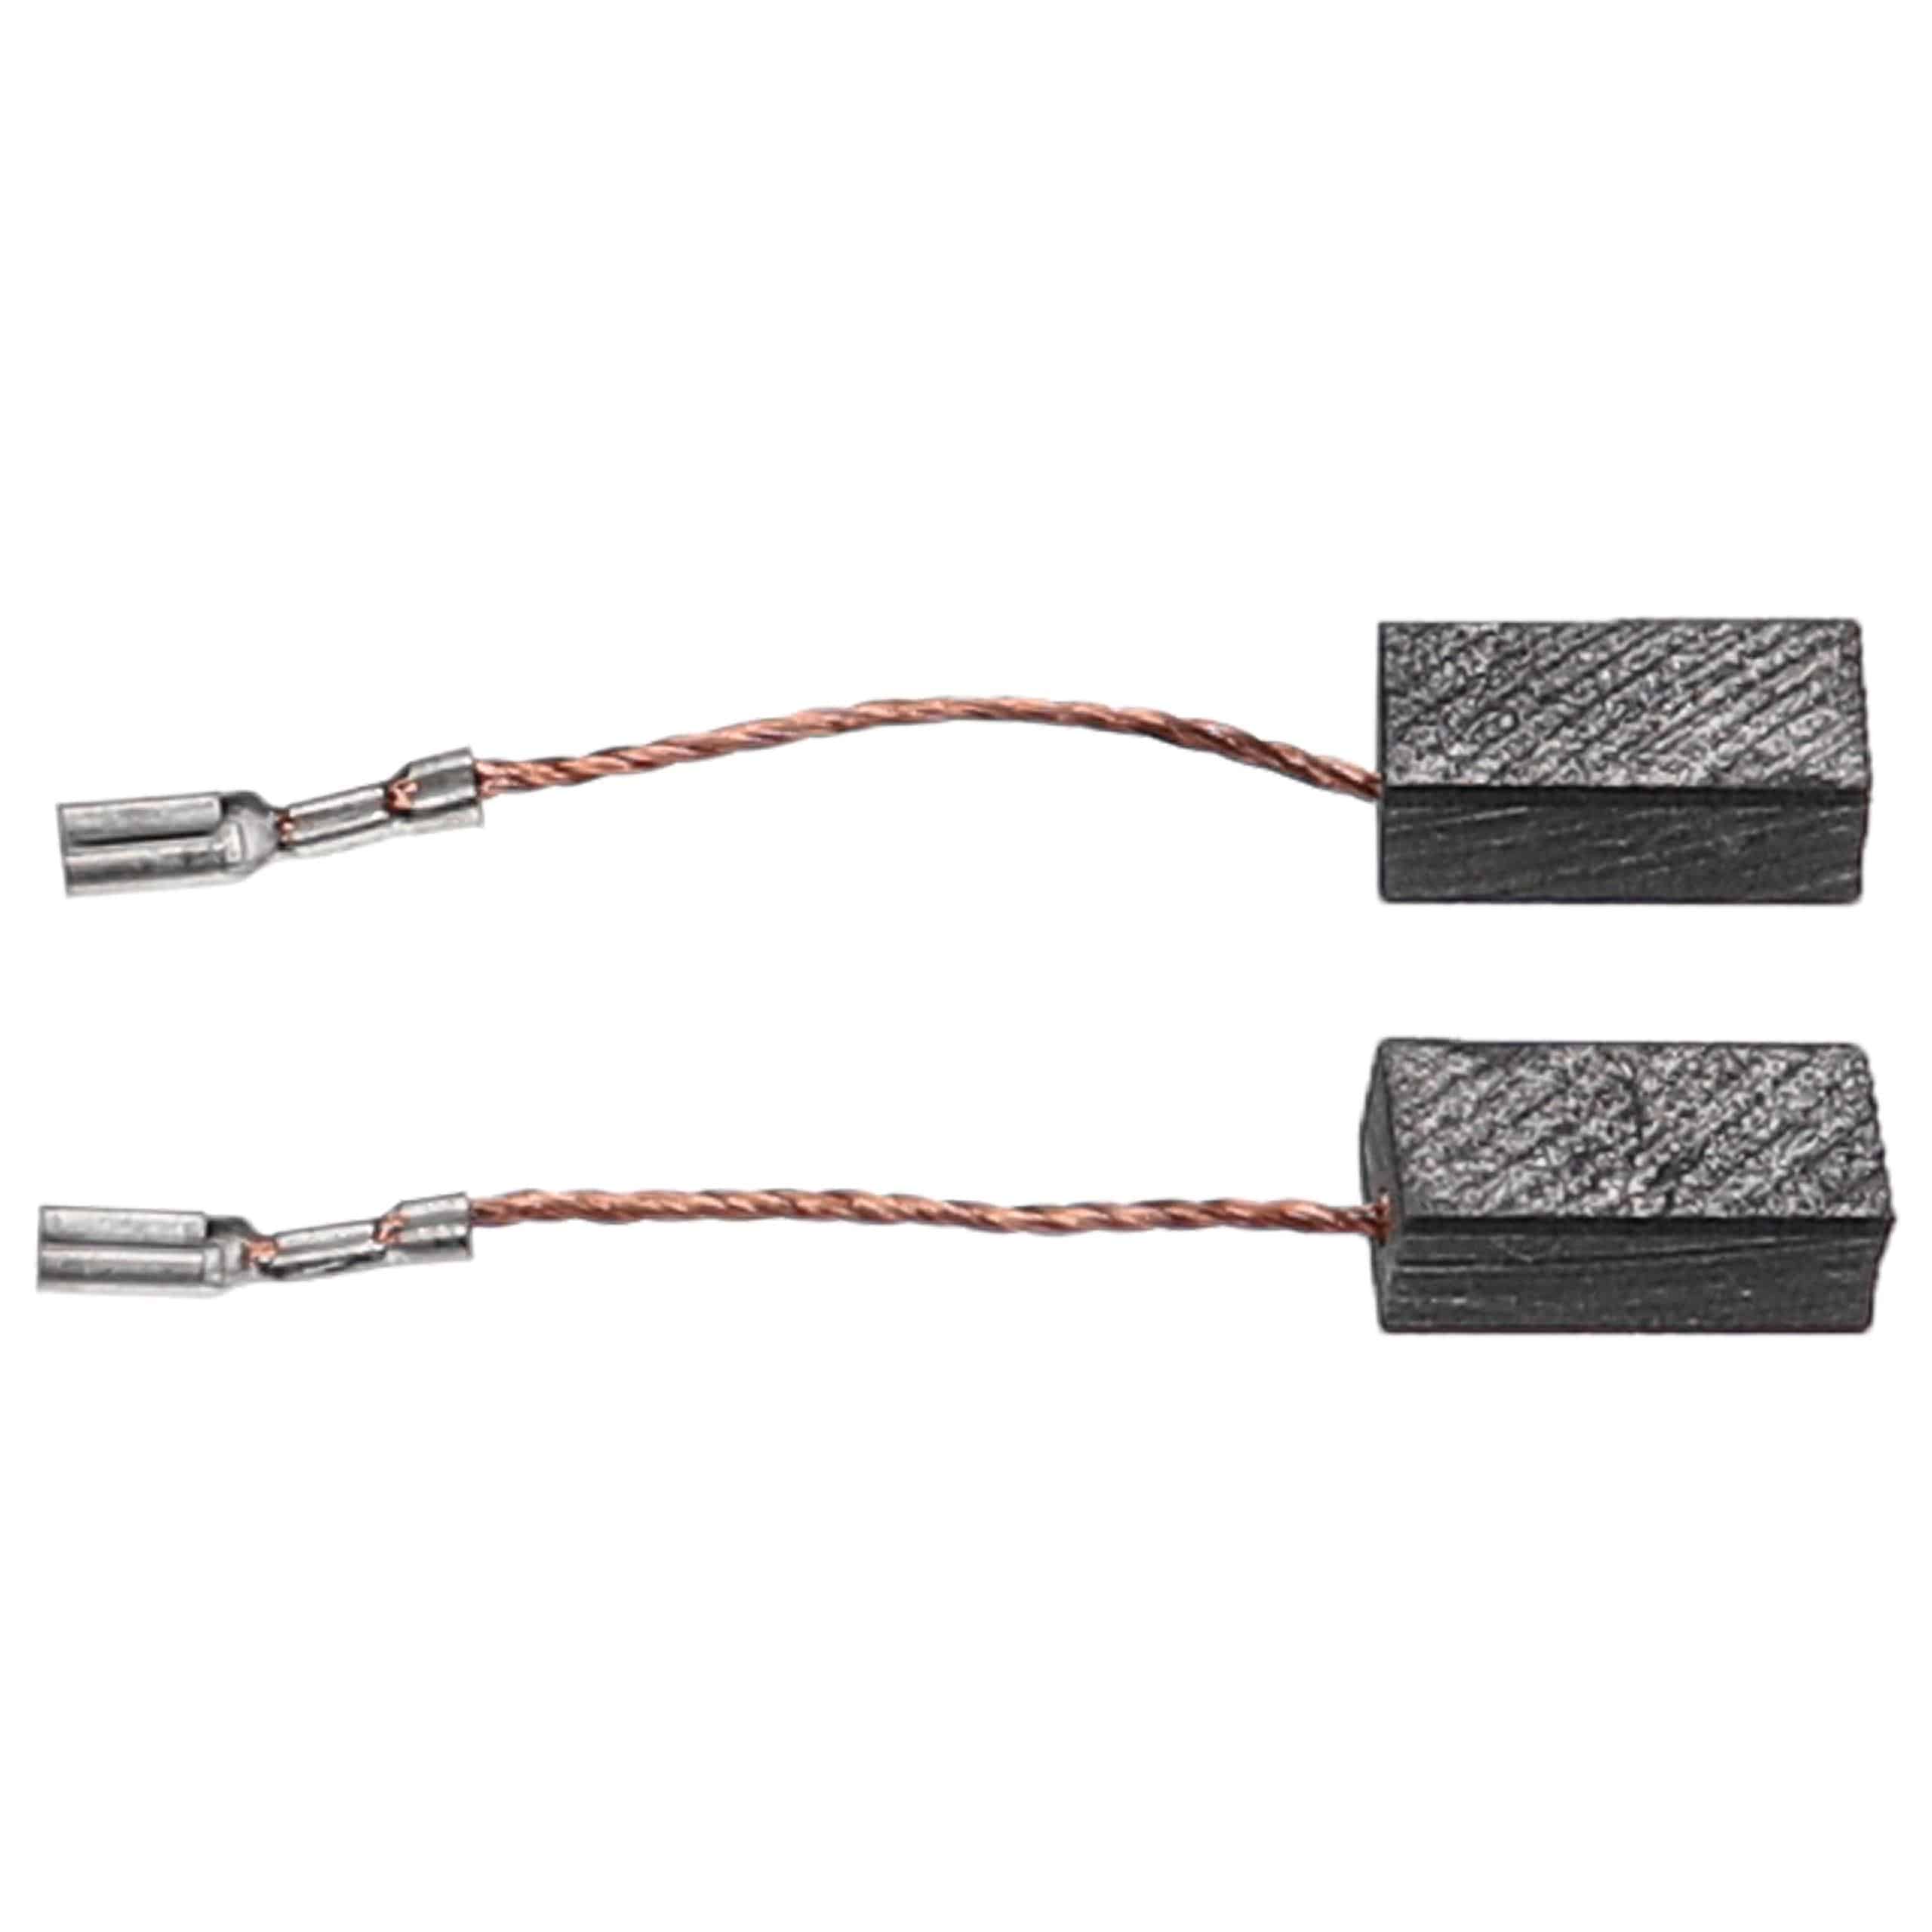 2x Carbon Brush as Replacement for Hitachi 999-076 Electric Power Tools, 6.5 x 9 x 17mm